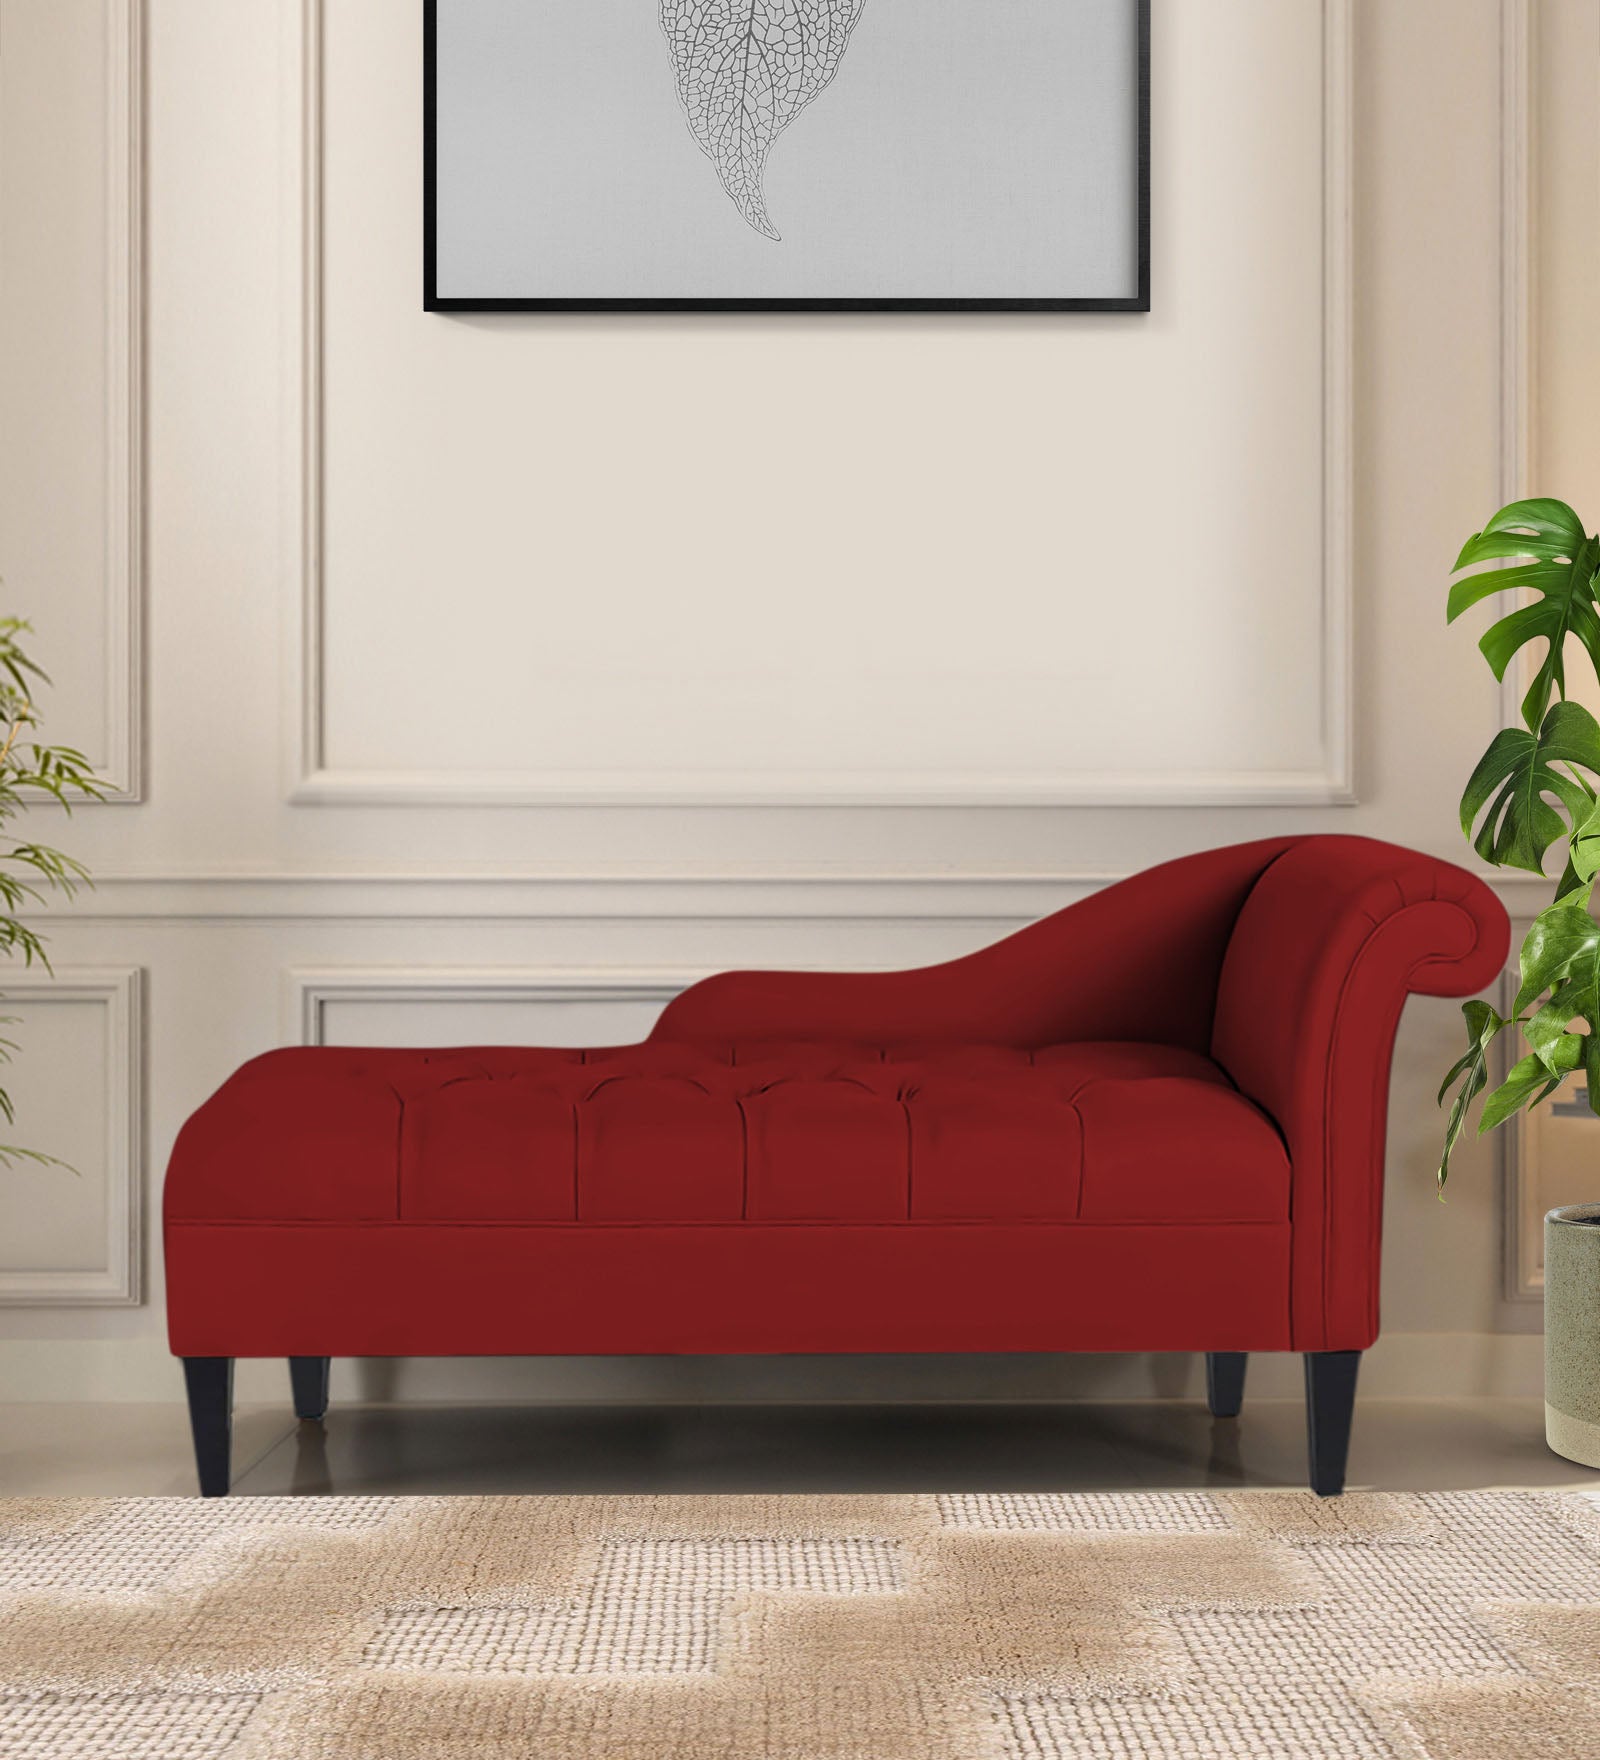 Adria Fabric LHS Chaise Lounger in Blood Maroon Colour